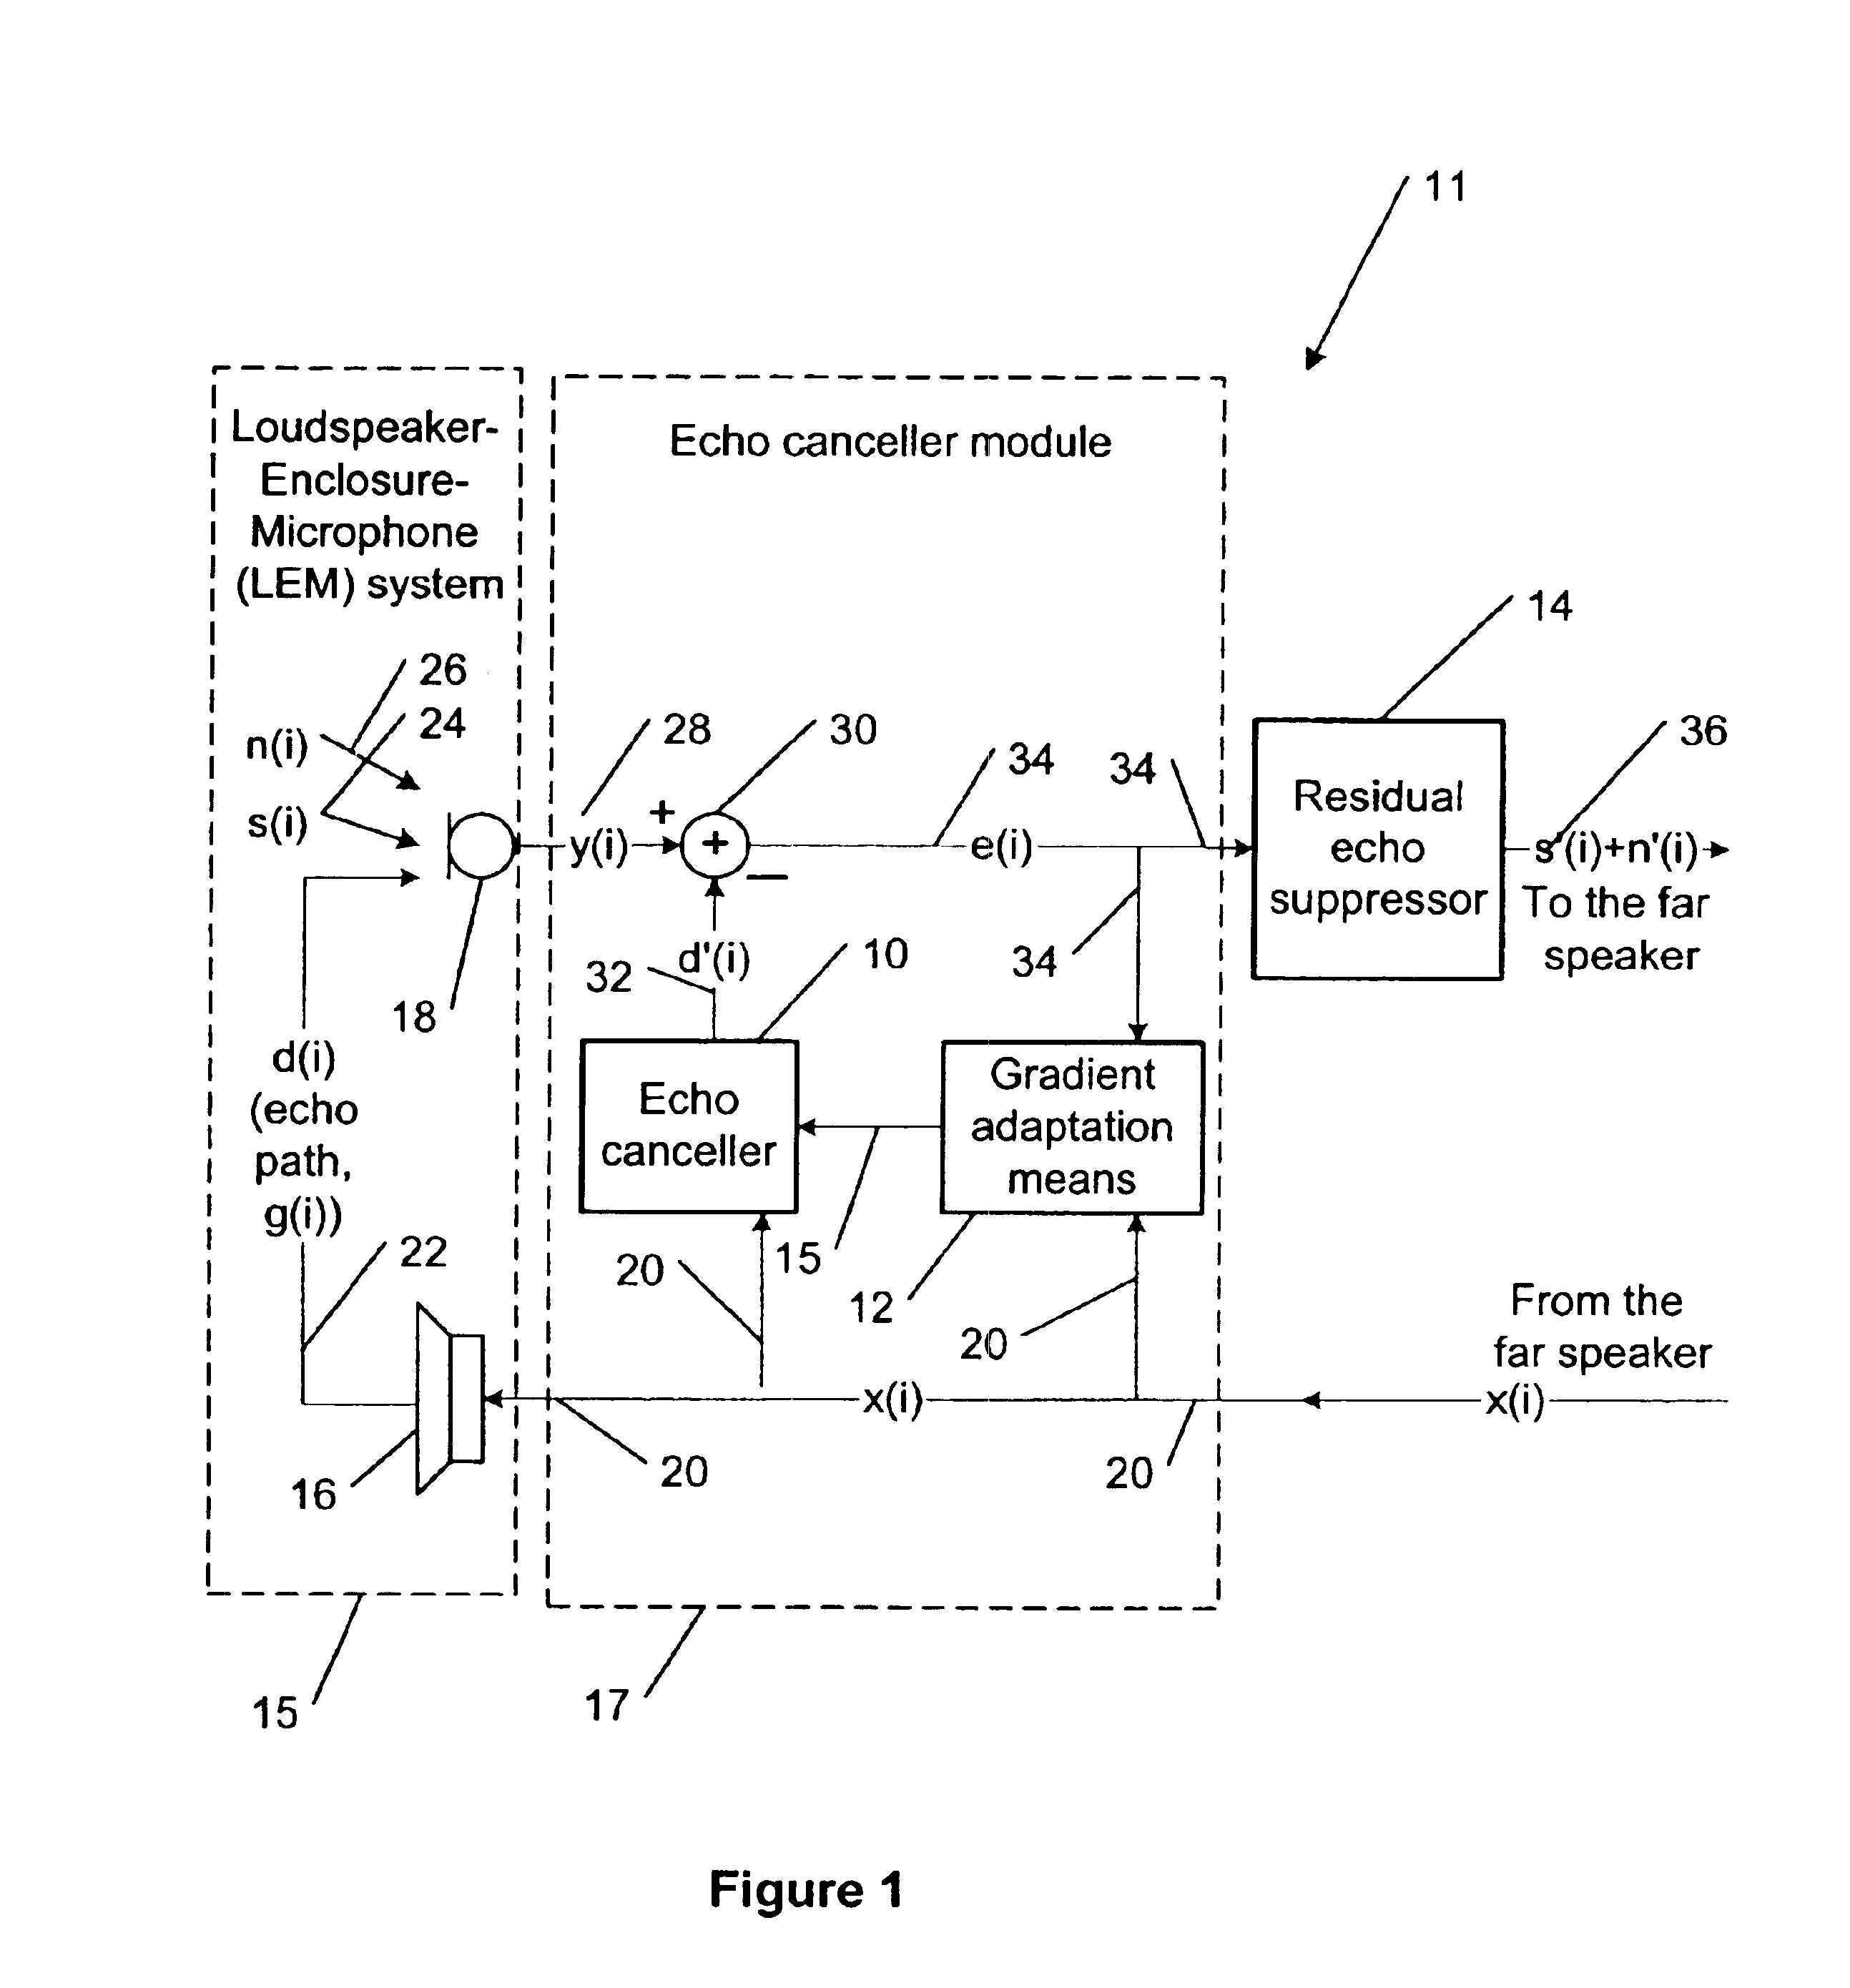 Method for enhancing the acoustic echo cancellation system using residual echo filter